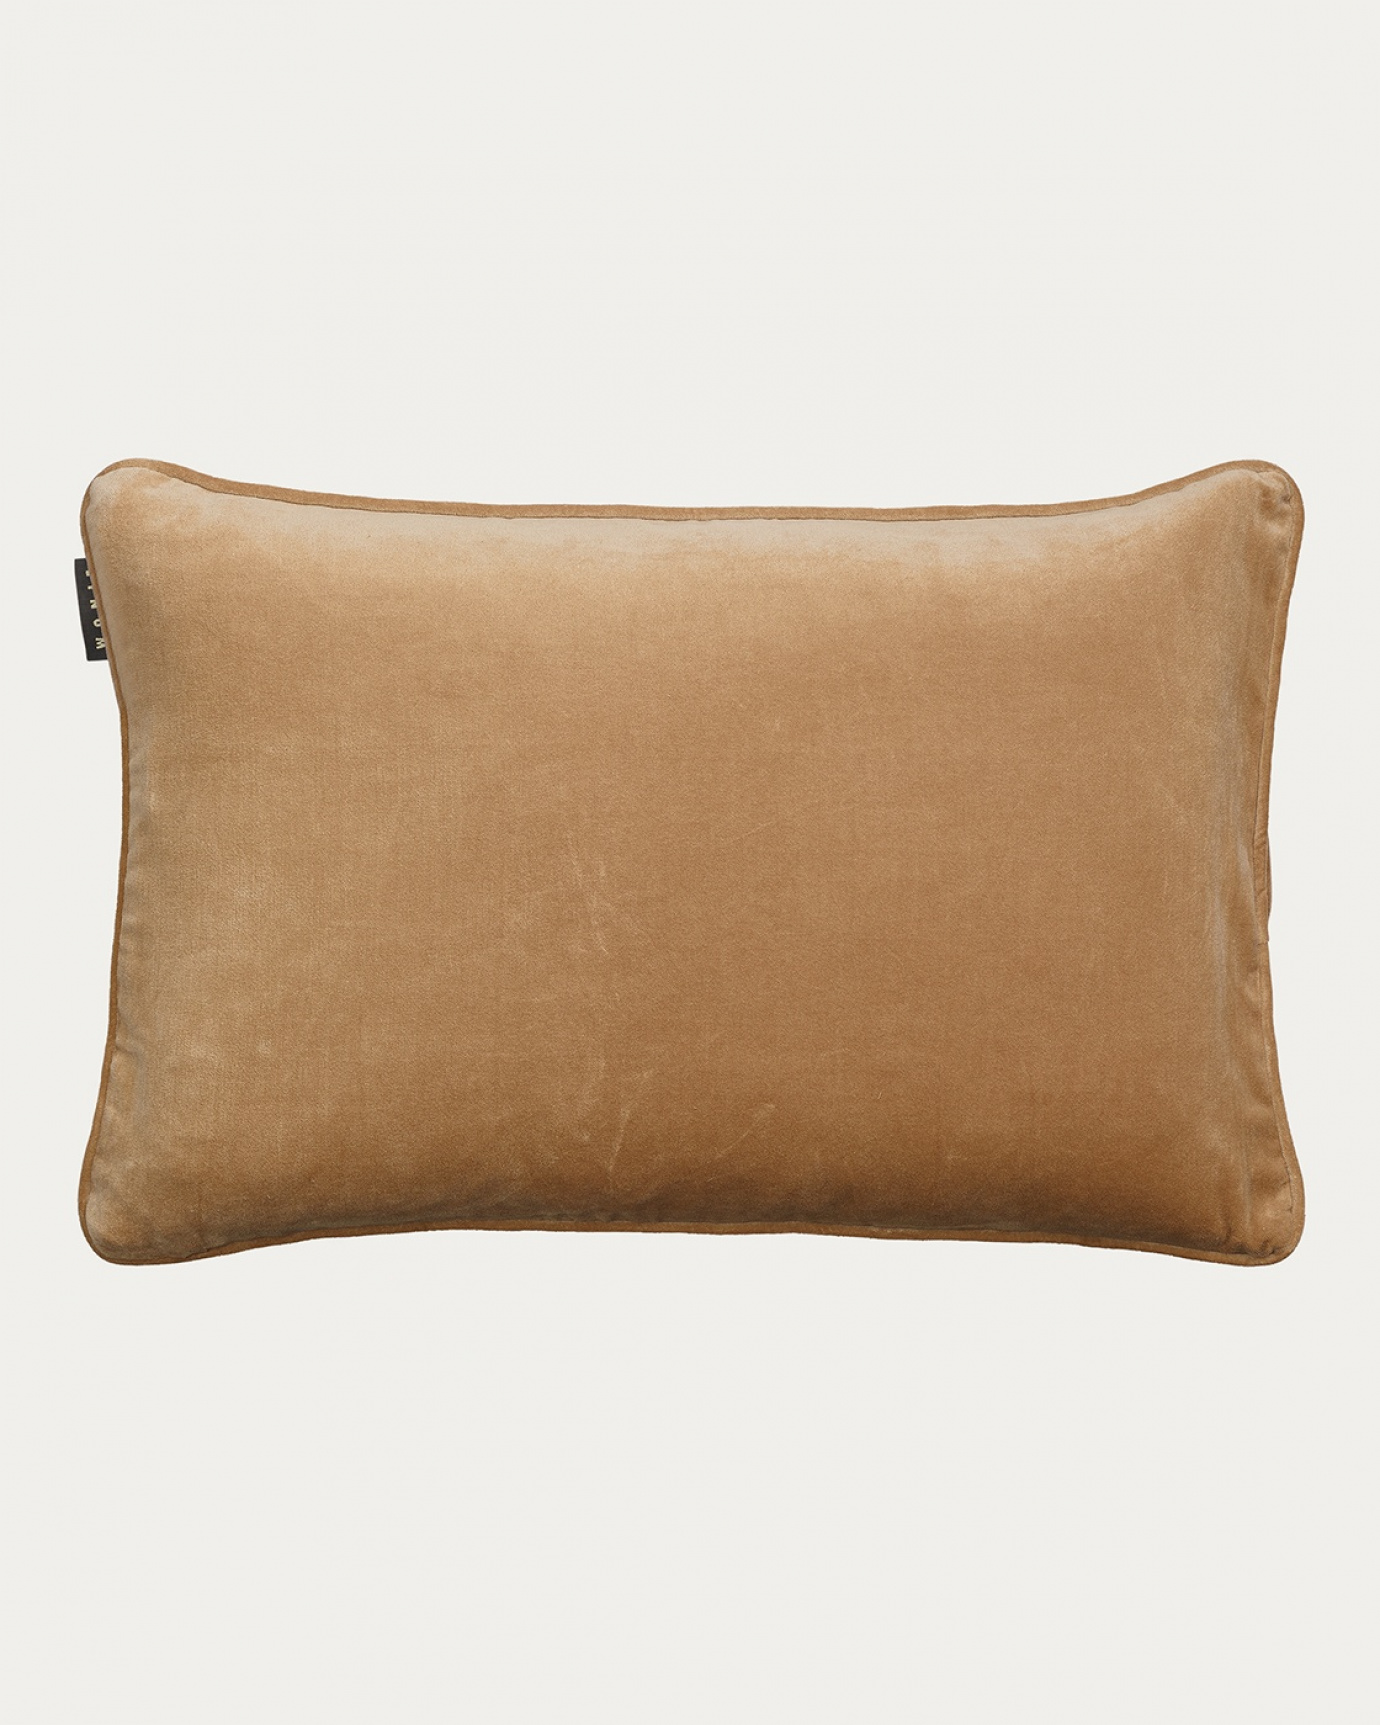 Product image camel brown PAOLO cushion cover in soft organic cotton velvet from LINUM DESIGN. Size 40x60 cm.